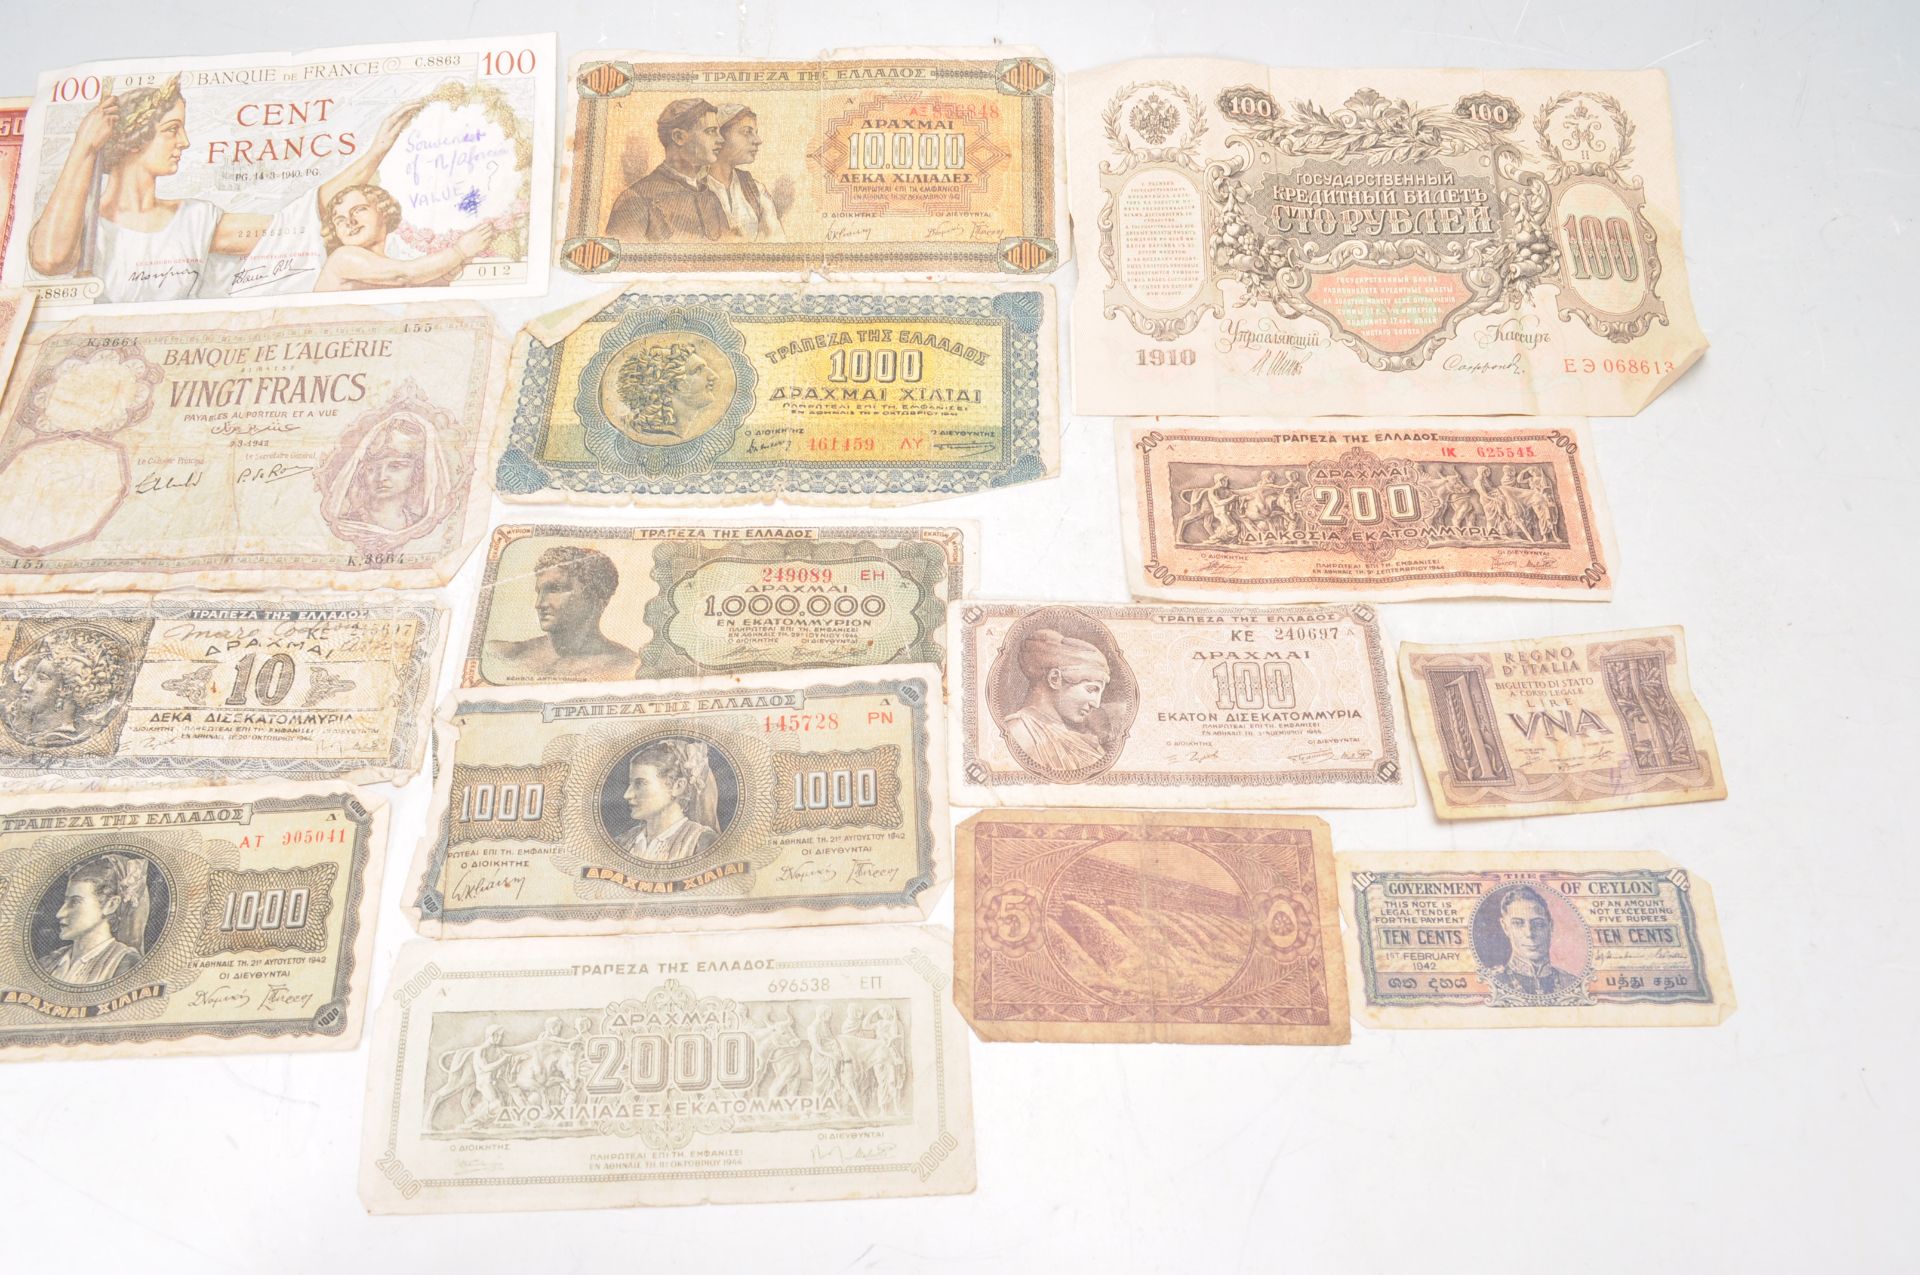 COLLECTION OF INTERNATIONAL CURRENCY NOTES FROM A VARIETY OF COUNTRIES - Image 3 of 3